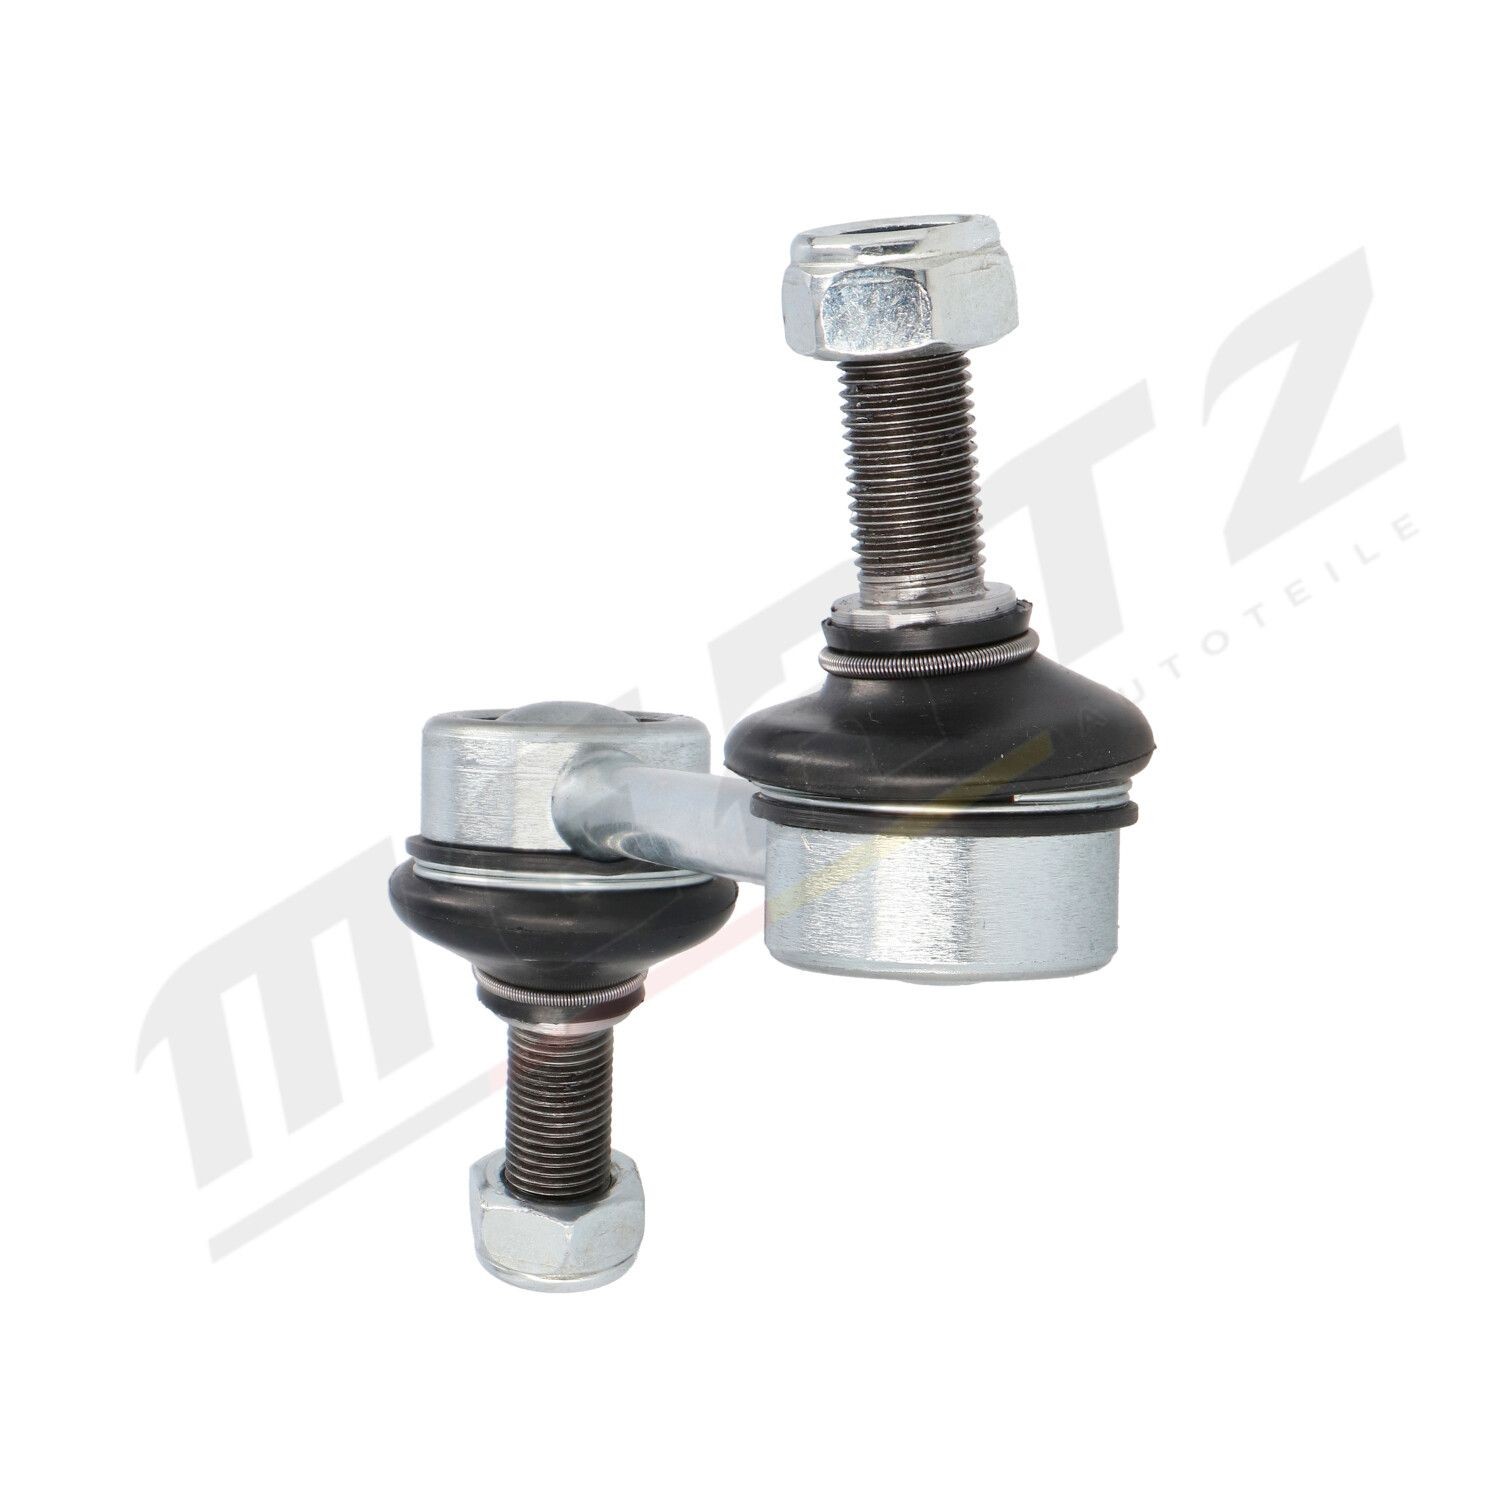 MS1764 Anti-roll bar links MERTZ M-S1764 review and test